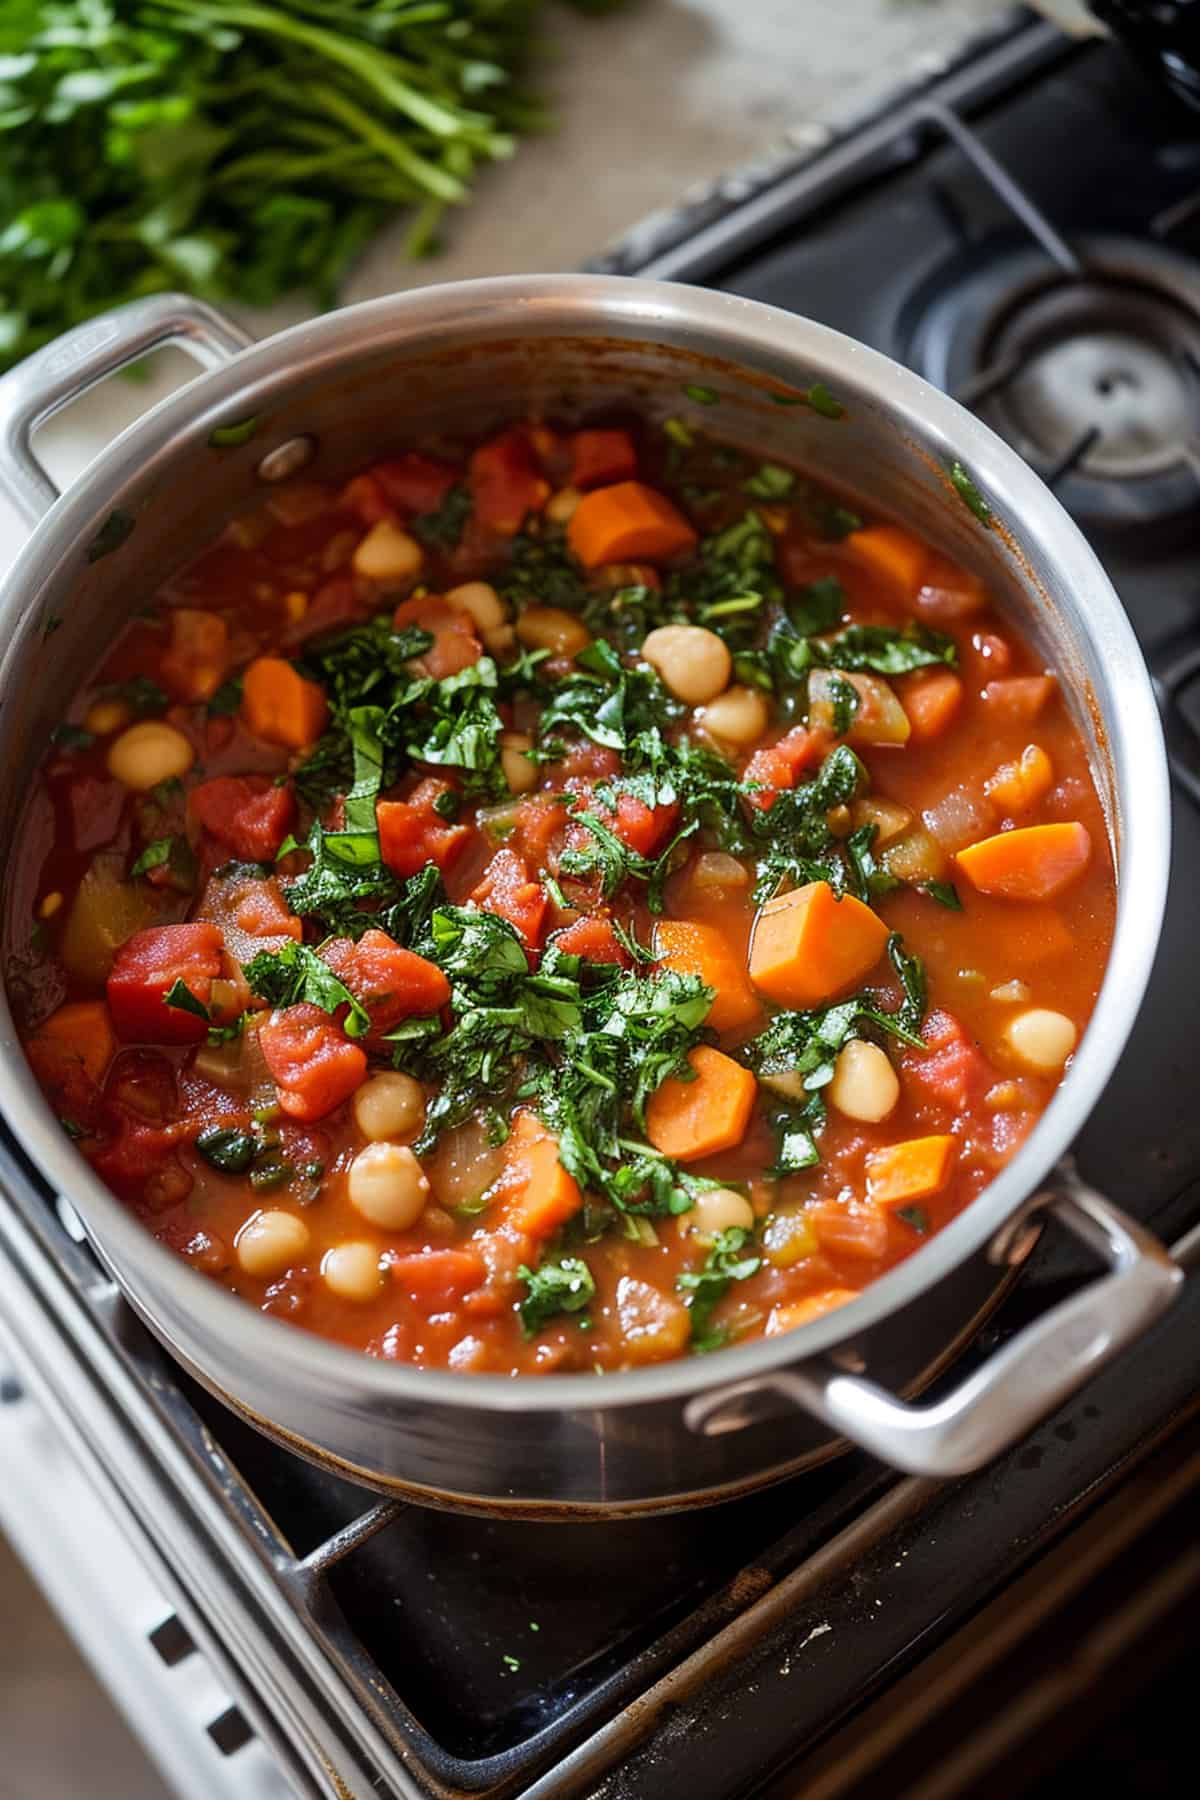 White bean minestrone cooking in a pot on the stove.